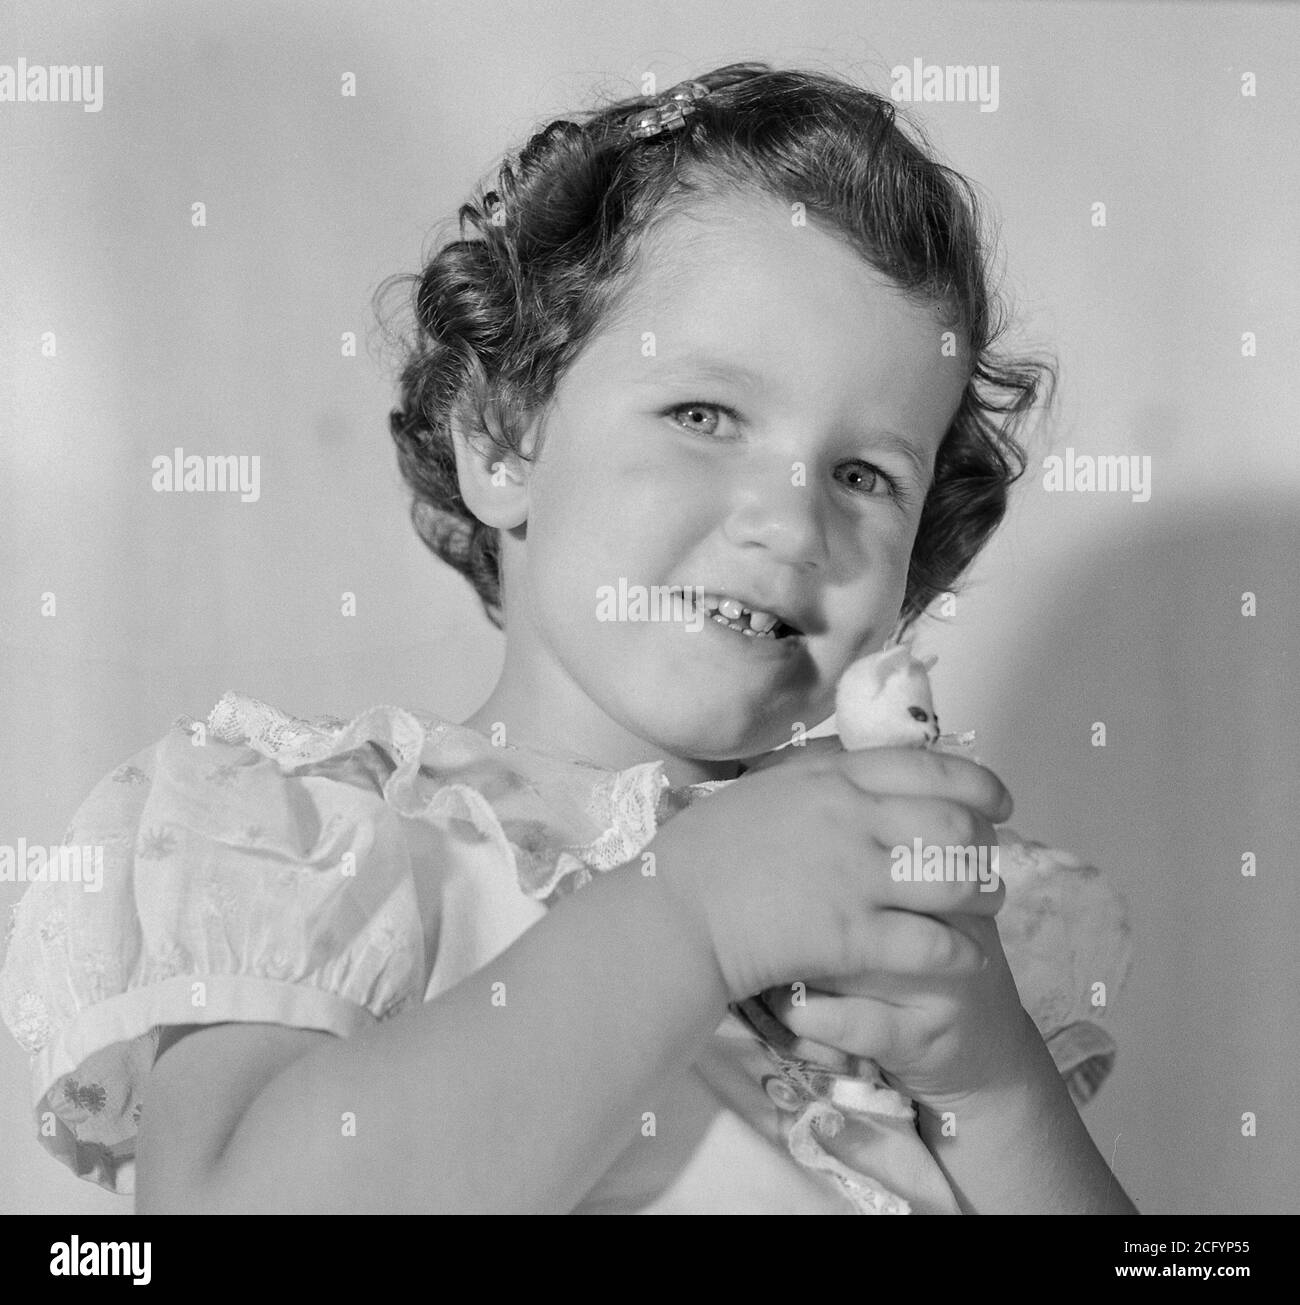 Toddler holds a small stuffed animal, 1950s, USA Stock Photo